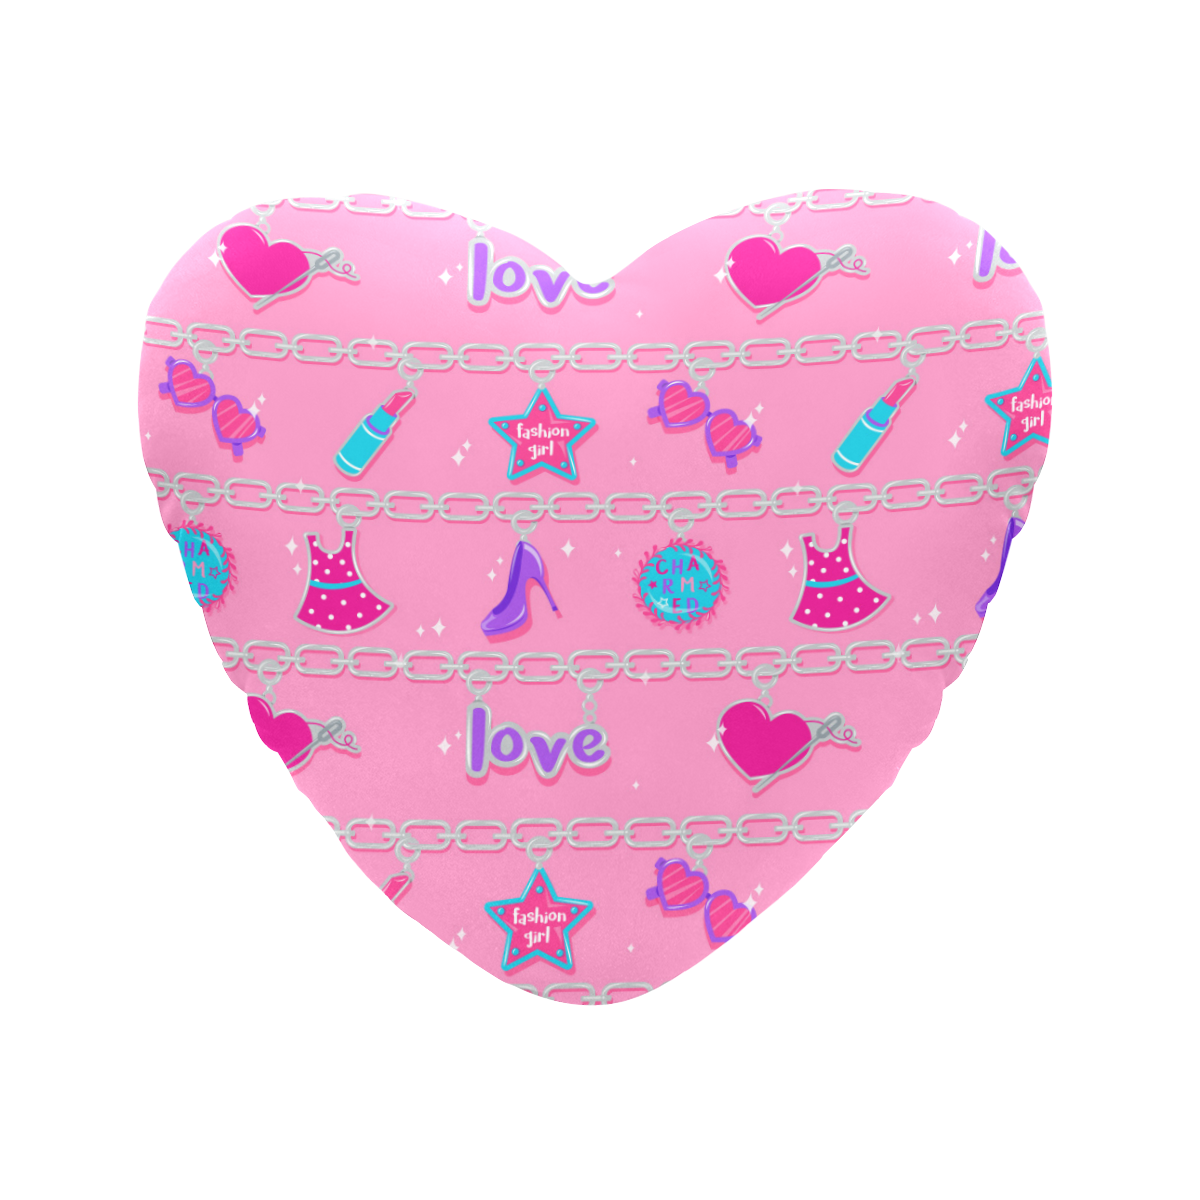 CHARMED HEART SHAPED PILLOW- PINK